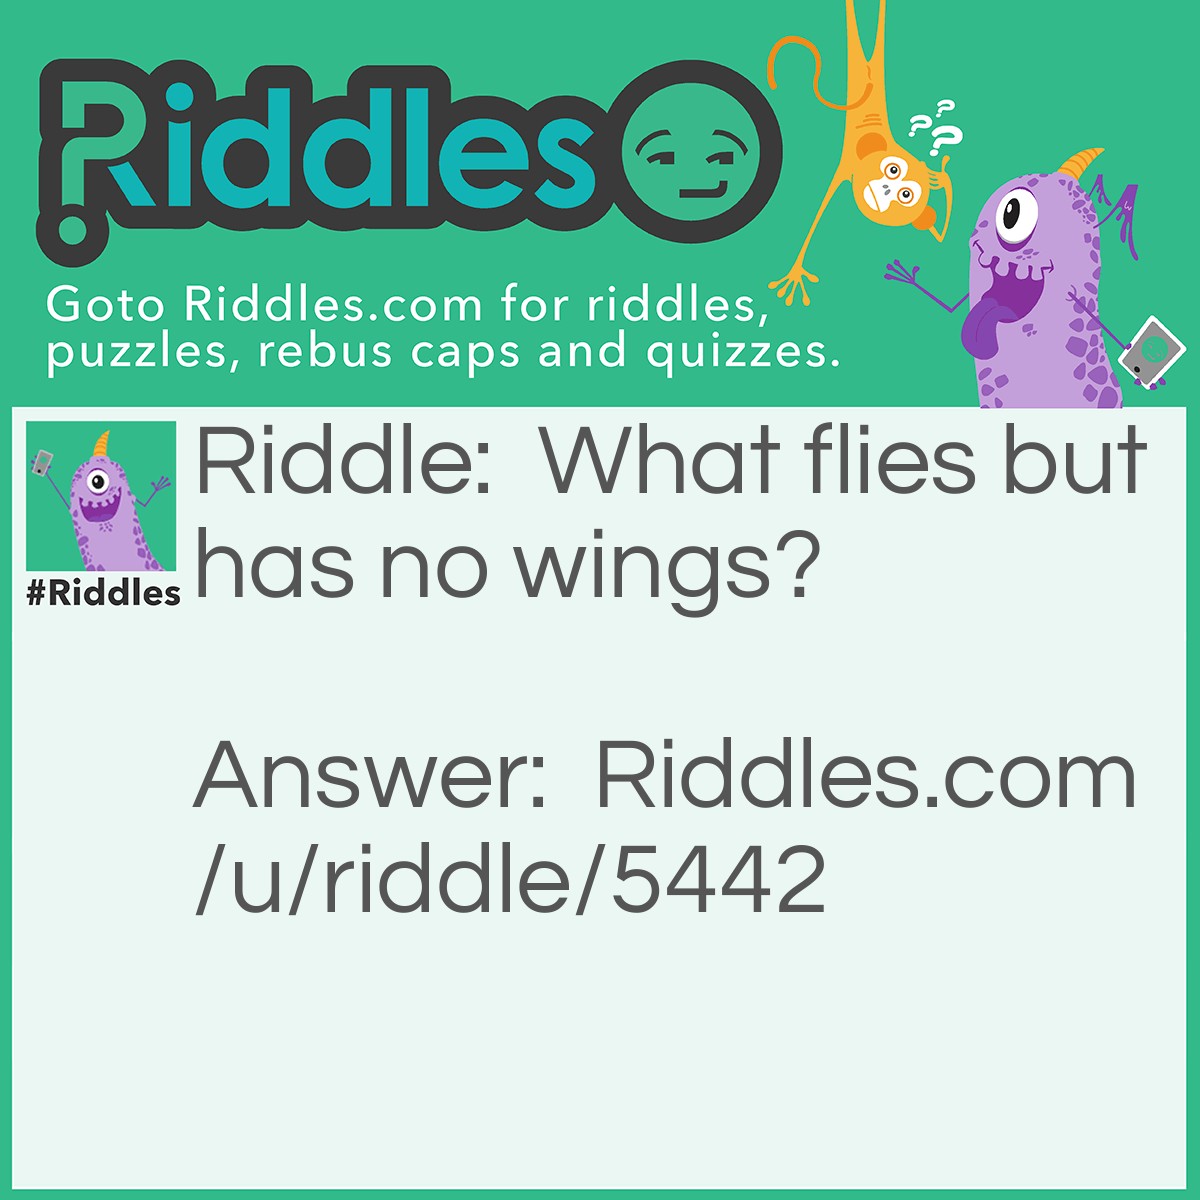 What Flies But Has No Wings?... - Riddles & Answers 